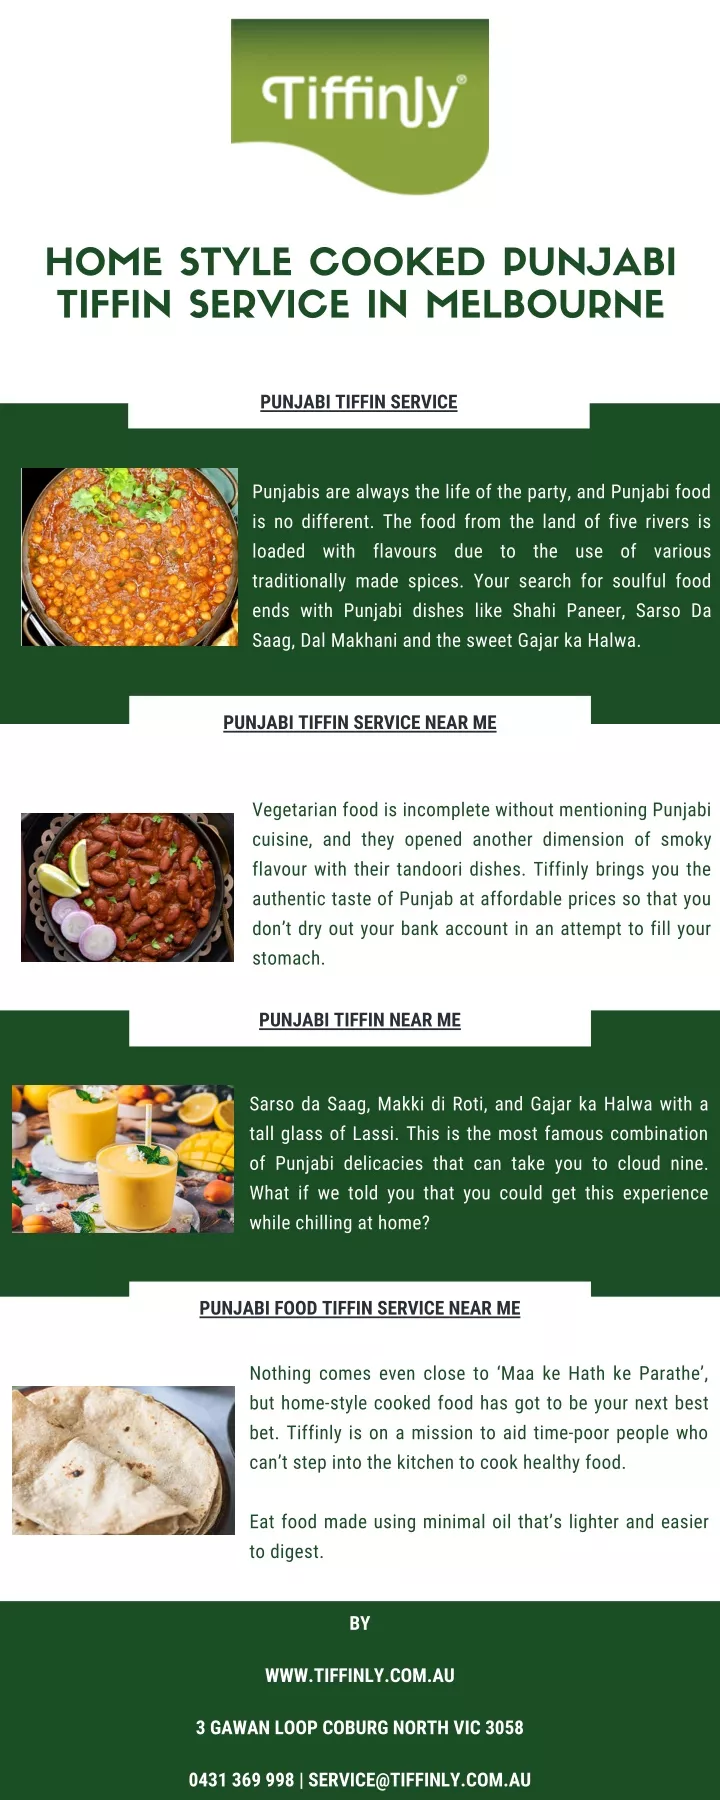 home style cooked punjabi tiffin service